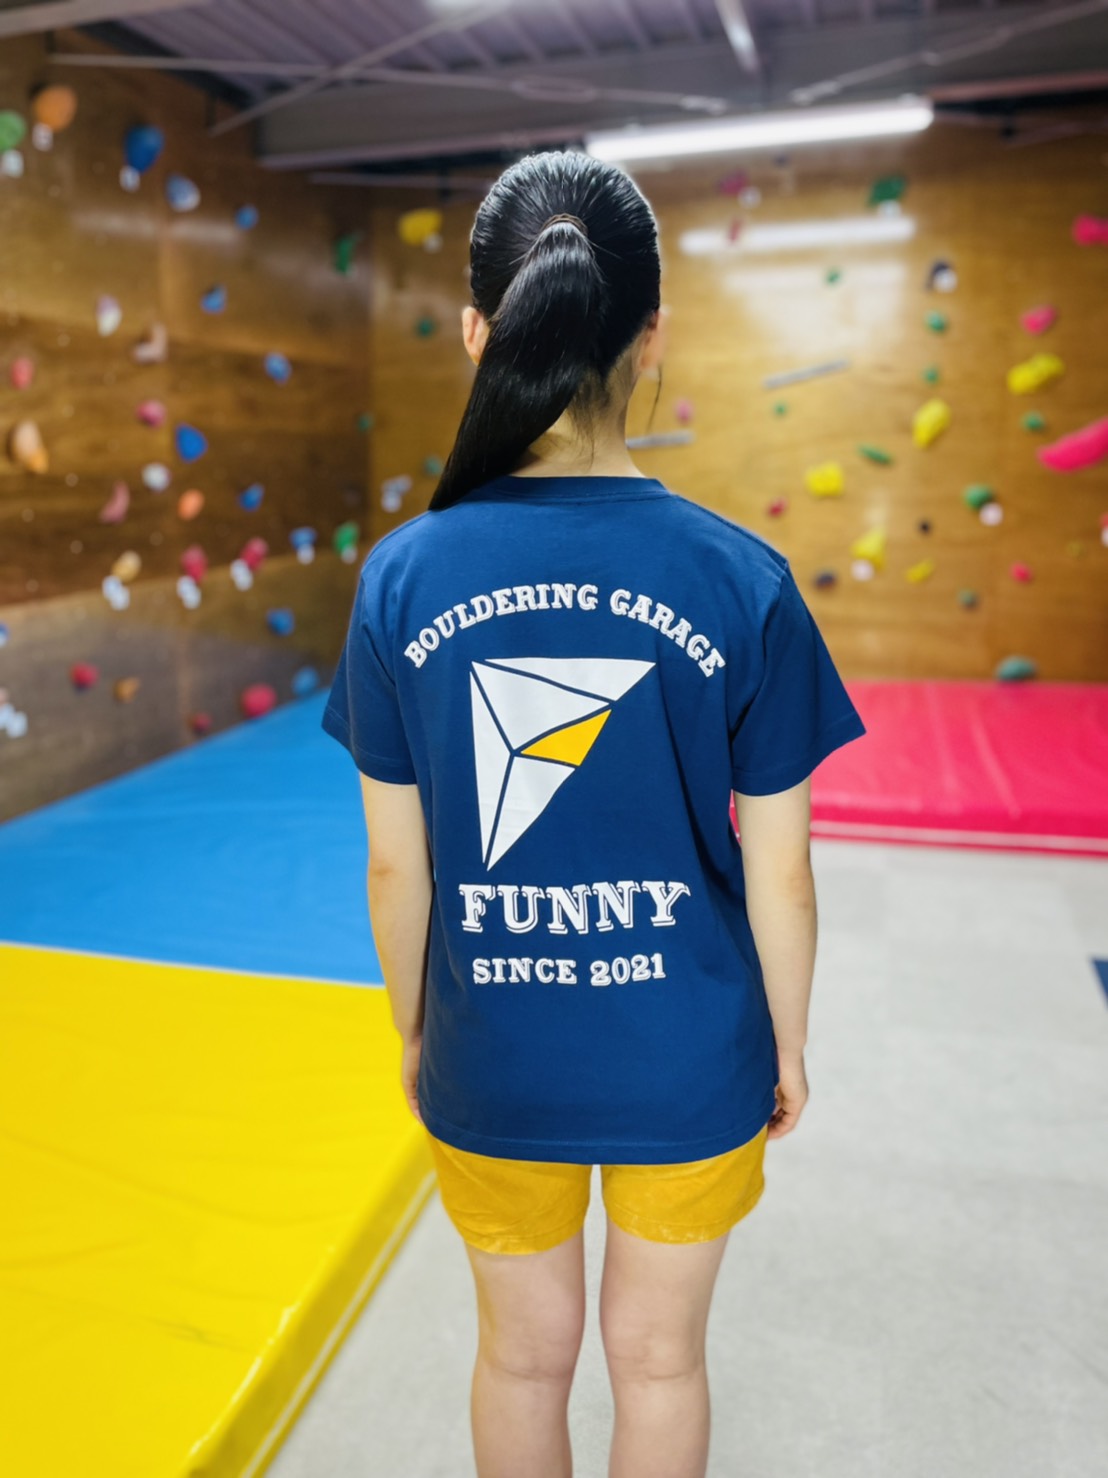 You are currently viewing 本日７月２８日よりBoulderingGarageFUNNYオリジナルTシャツ販売！